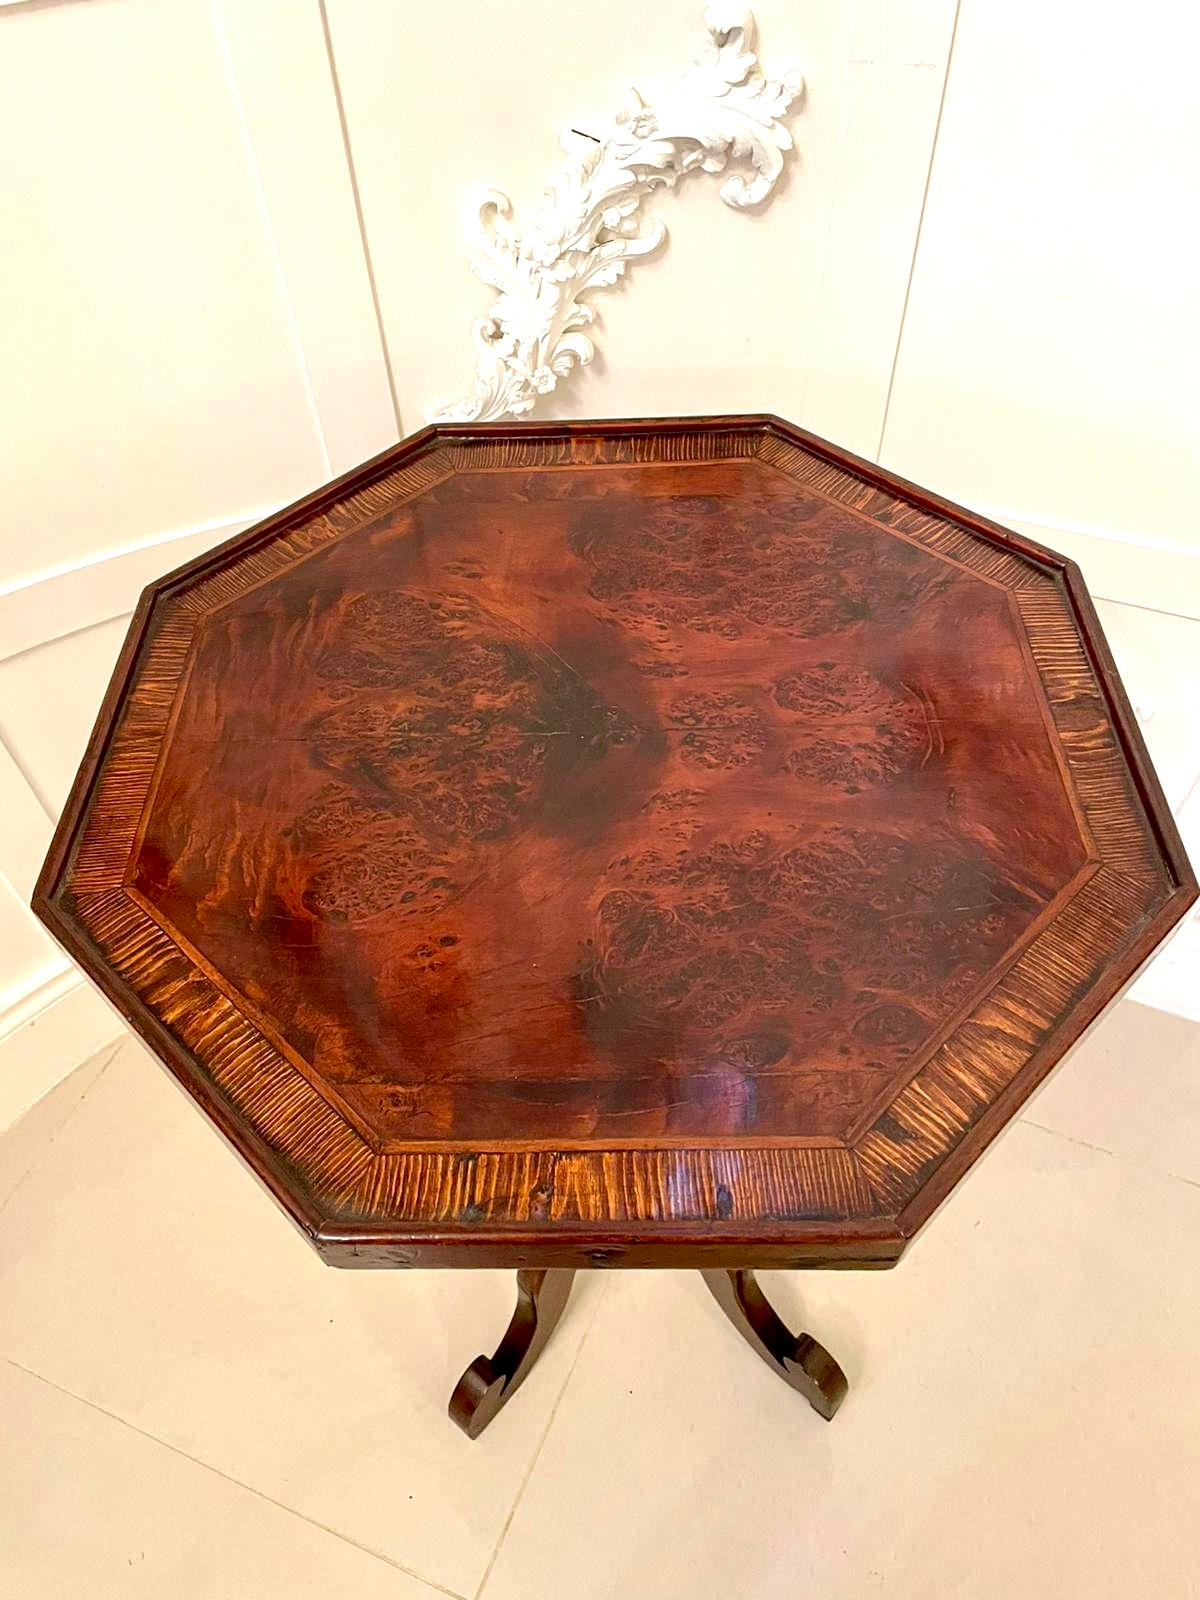 Rare antique 19th century New Zealand Victorian lamp table by W H Jewell of Christchurch, New Zealand. This stunning example crafted in native New Zealand woods having an octagonal shaped top crossbanded in Tiger Oak with a moulded edge and